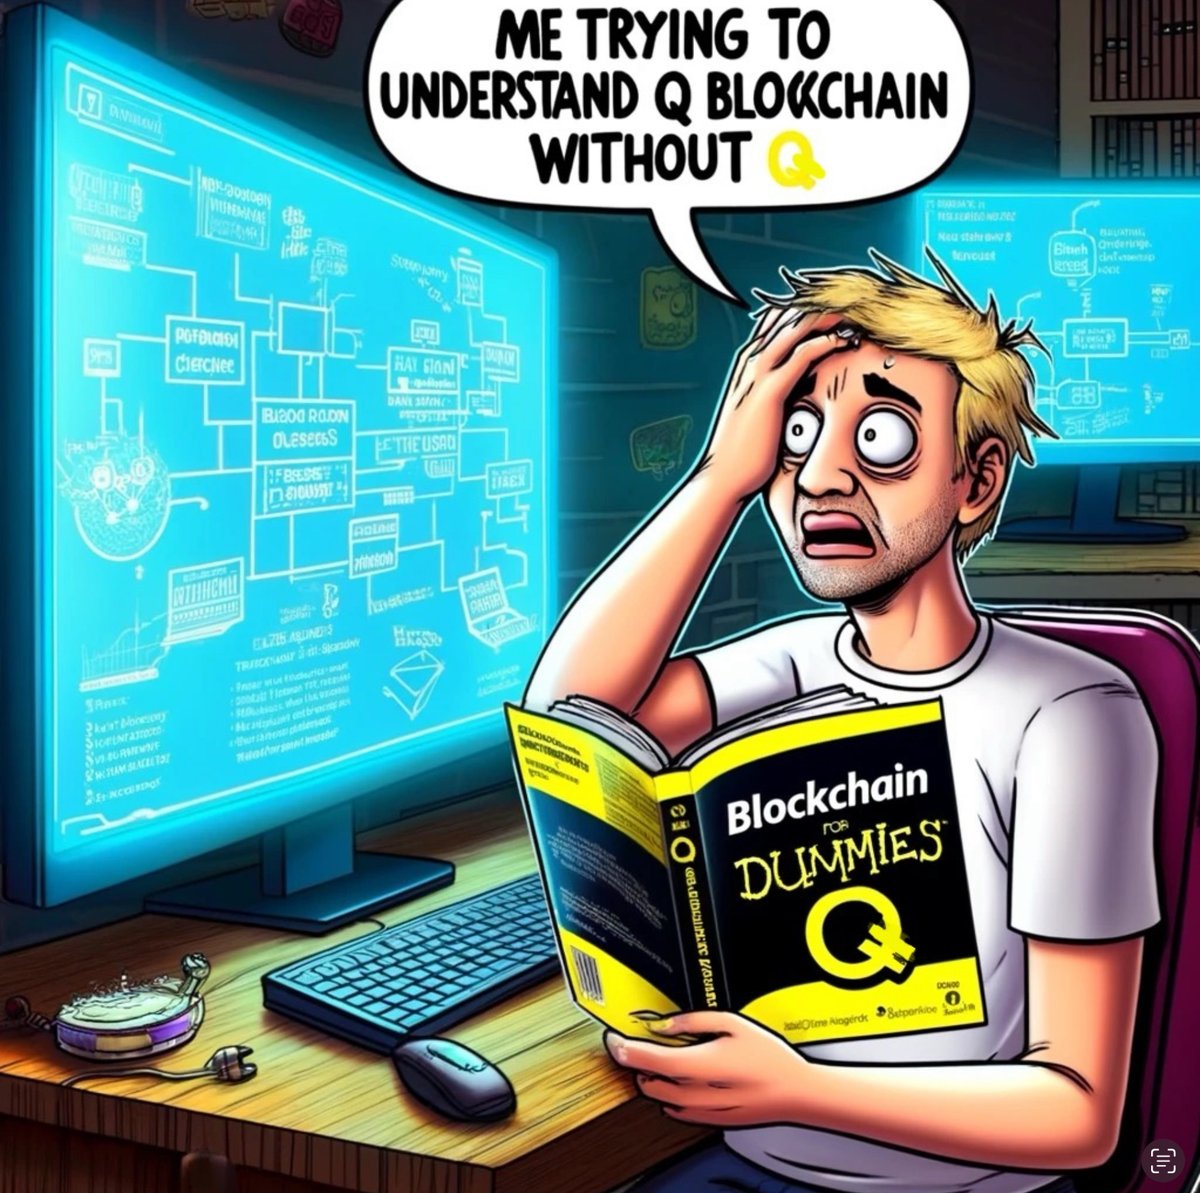 Where algorithms tuck each other in and your wallet never sleeps. It's like putting your crypto on autopilot, but the captain is software, and the crew is made of code. #BlockchainHumor #QLaughLast @QBlockchain  #blockchain #crypto